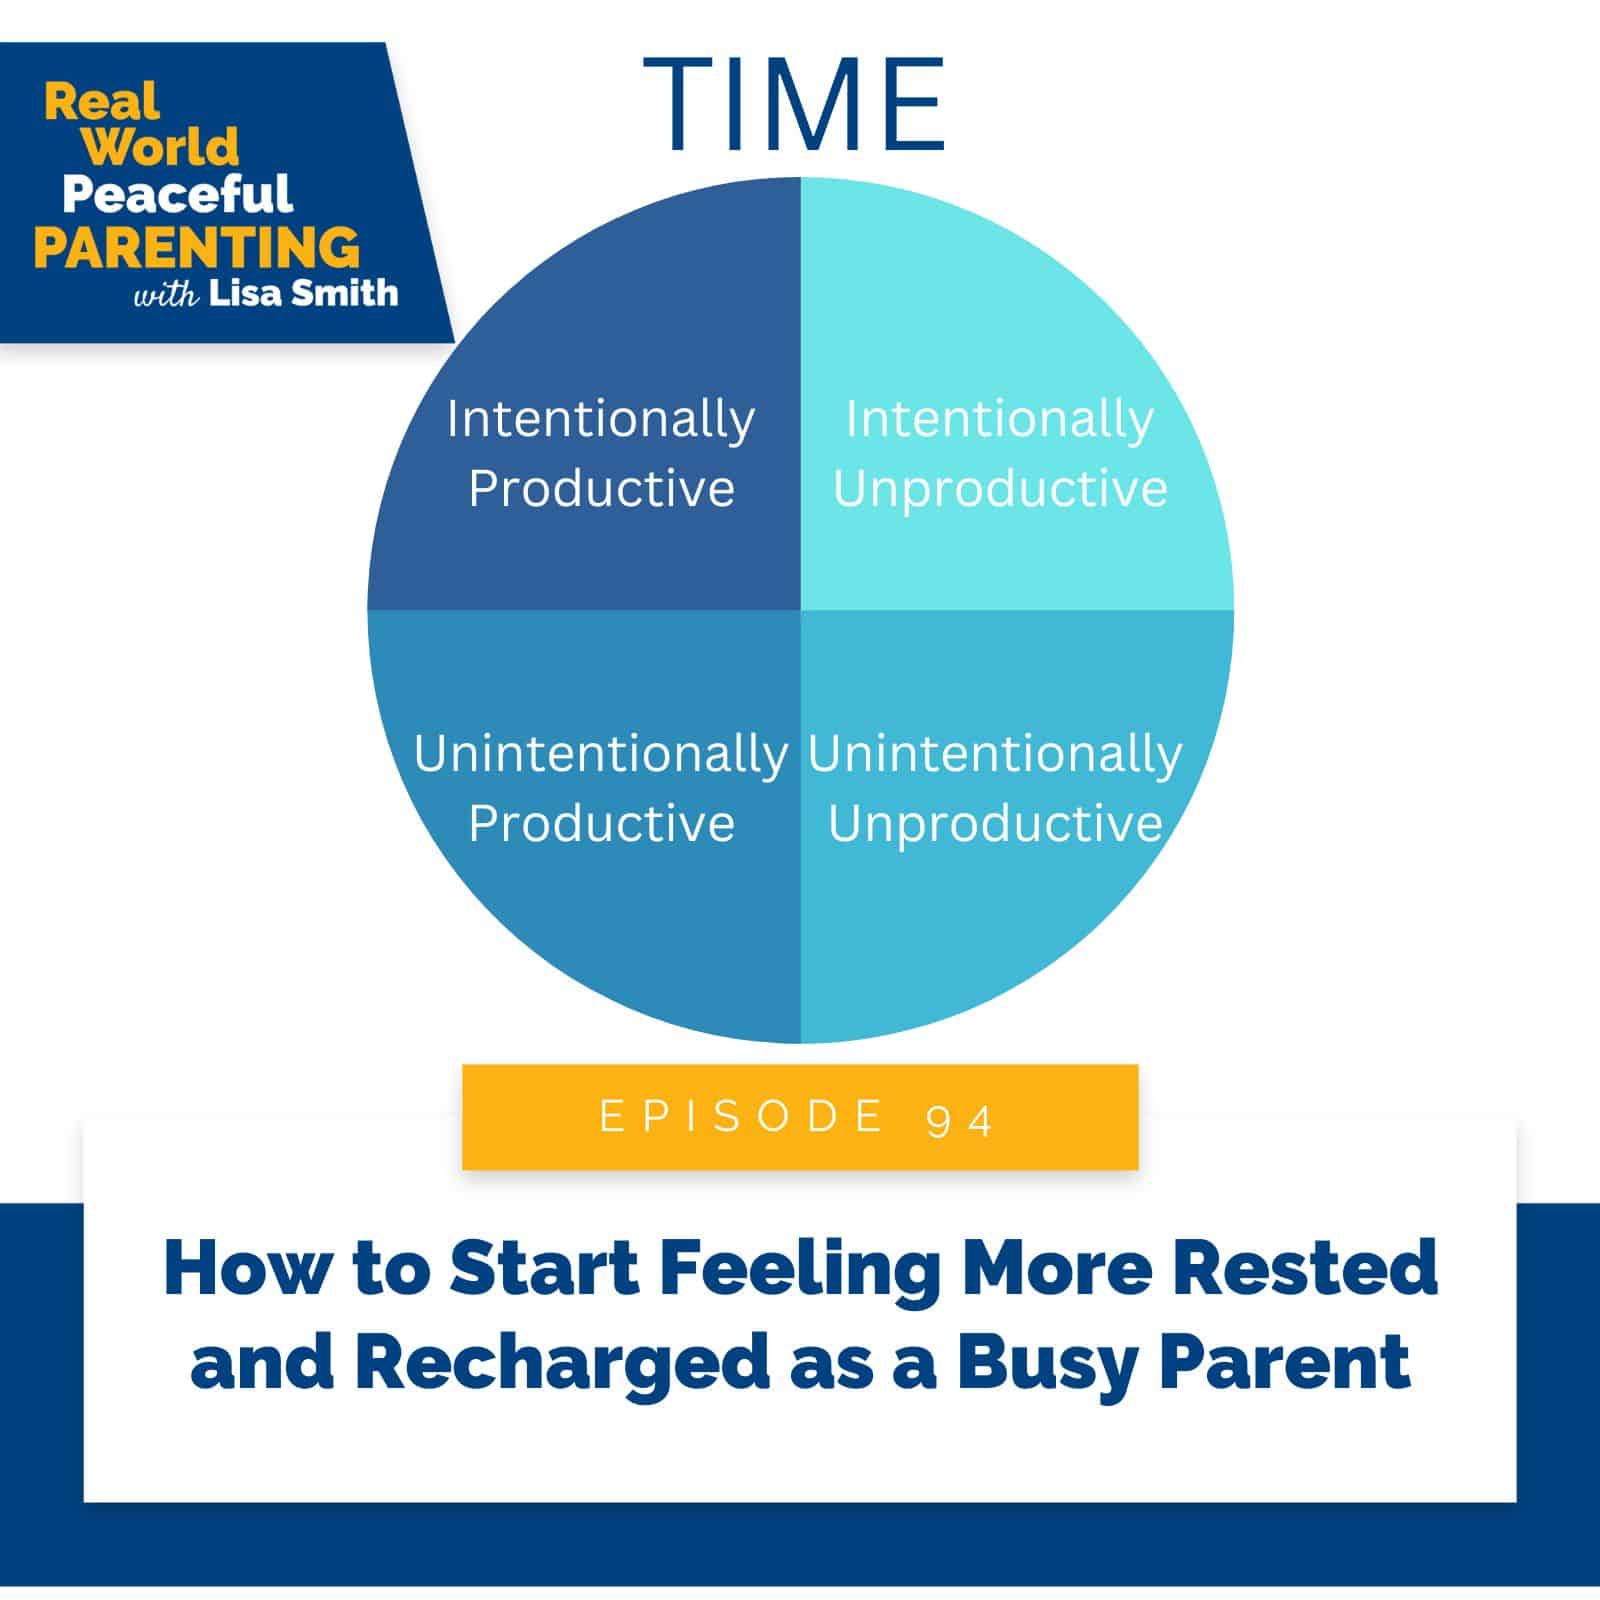 Real World Peaceful Parenting with Lisa Smith | How to Start Feeling More Rested and Recharged as a Busy Parent